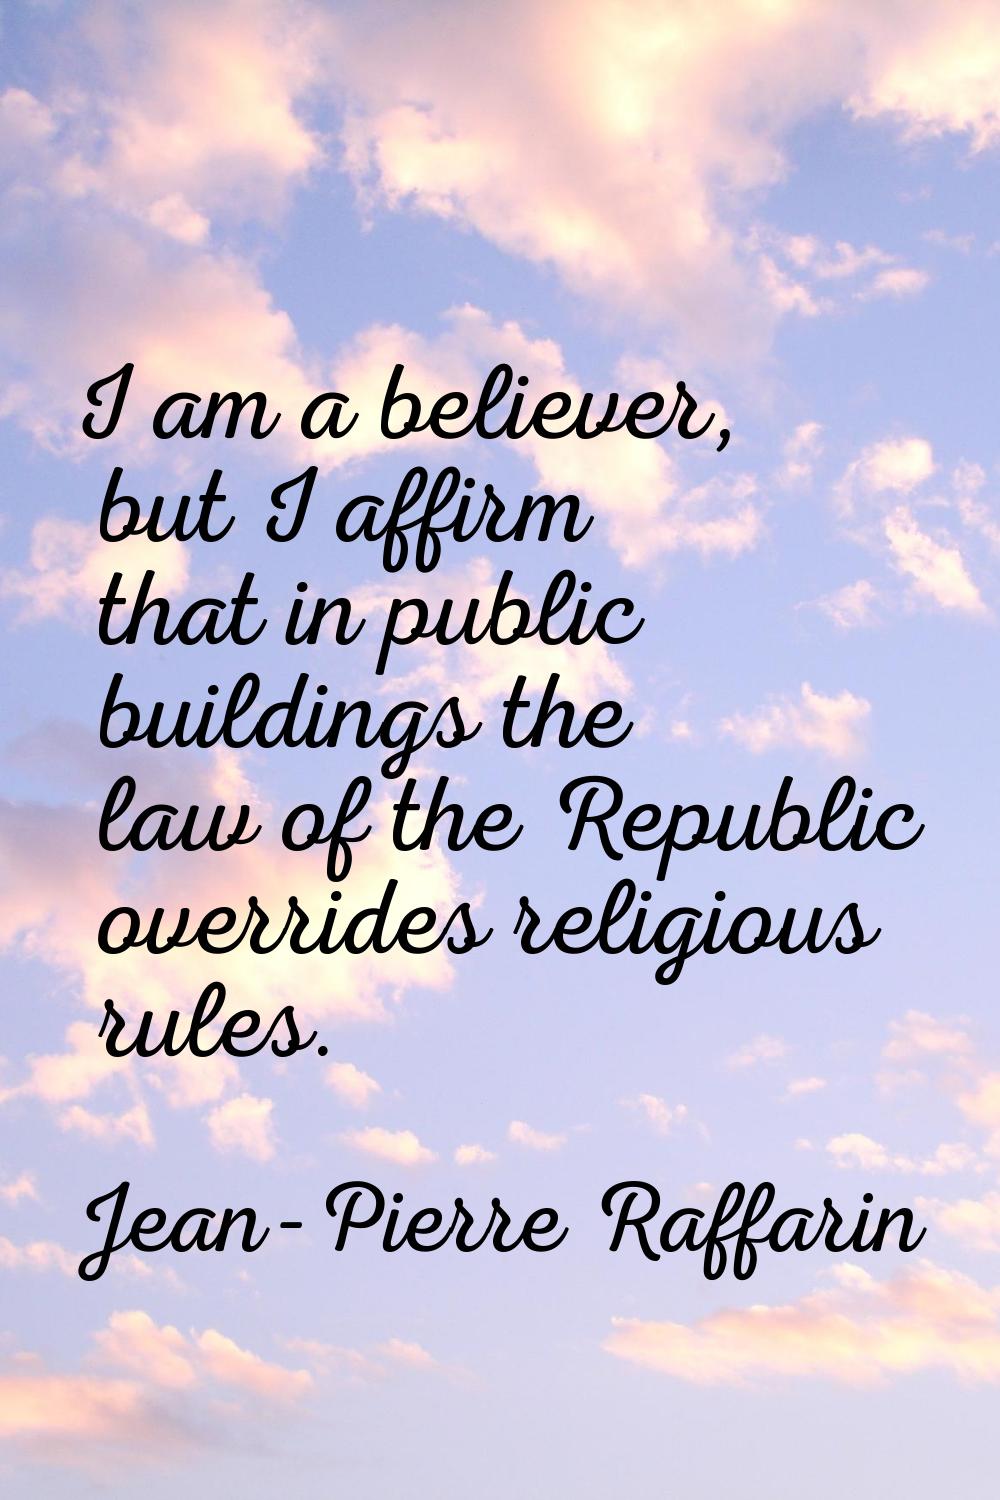 I am a believer, but I affirm that in public buildings the law of the Republic overrides religious 